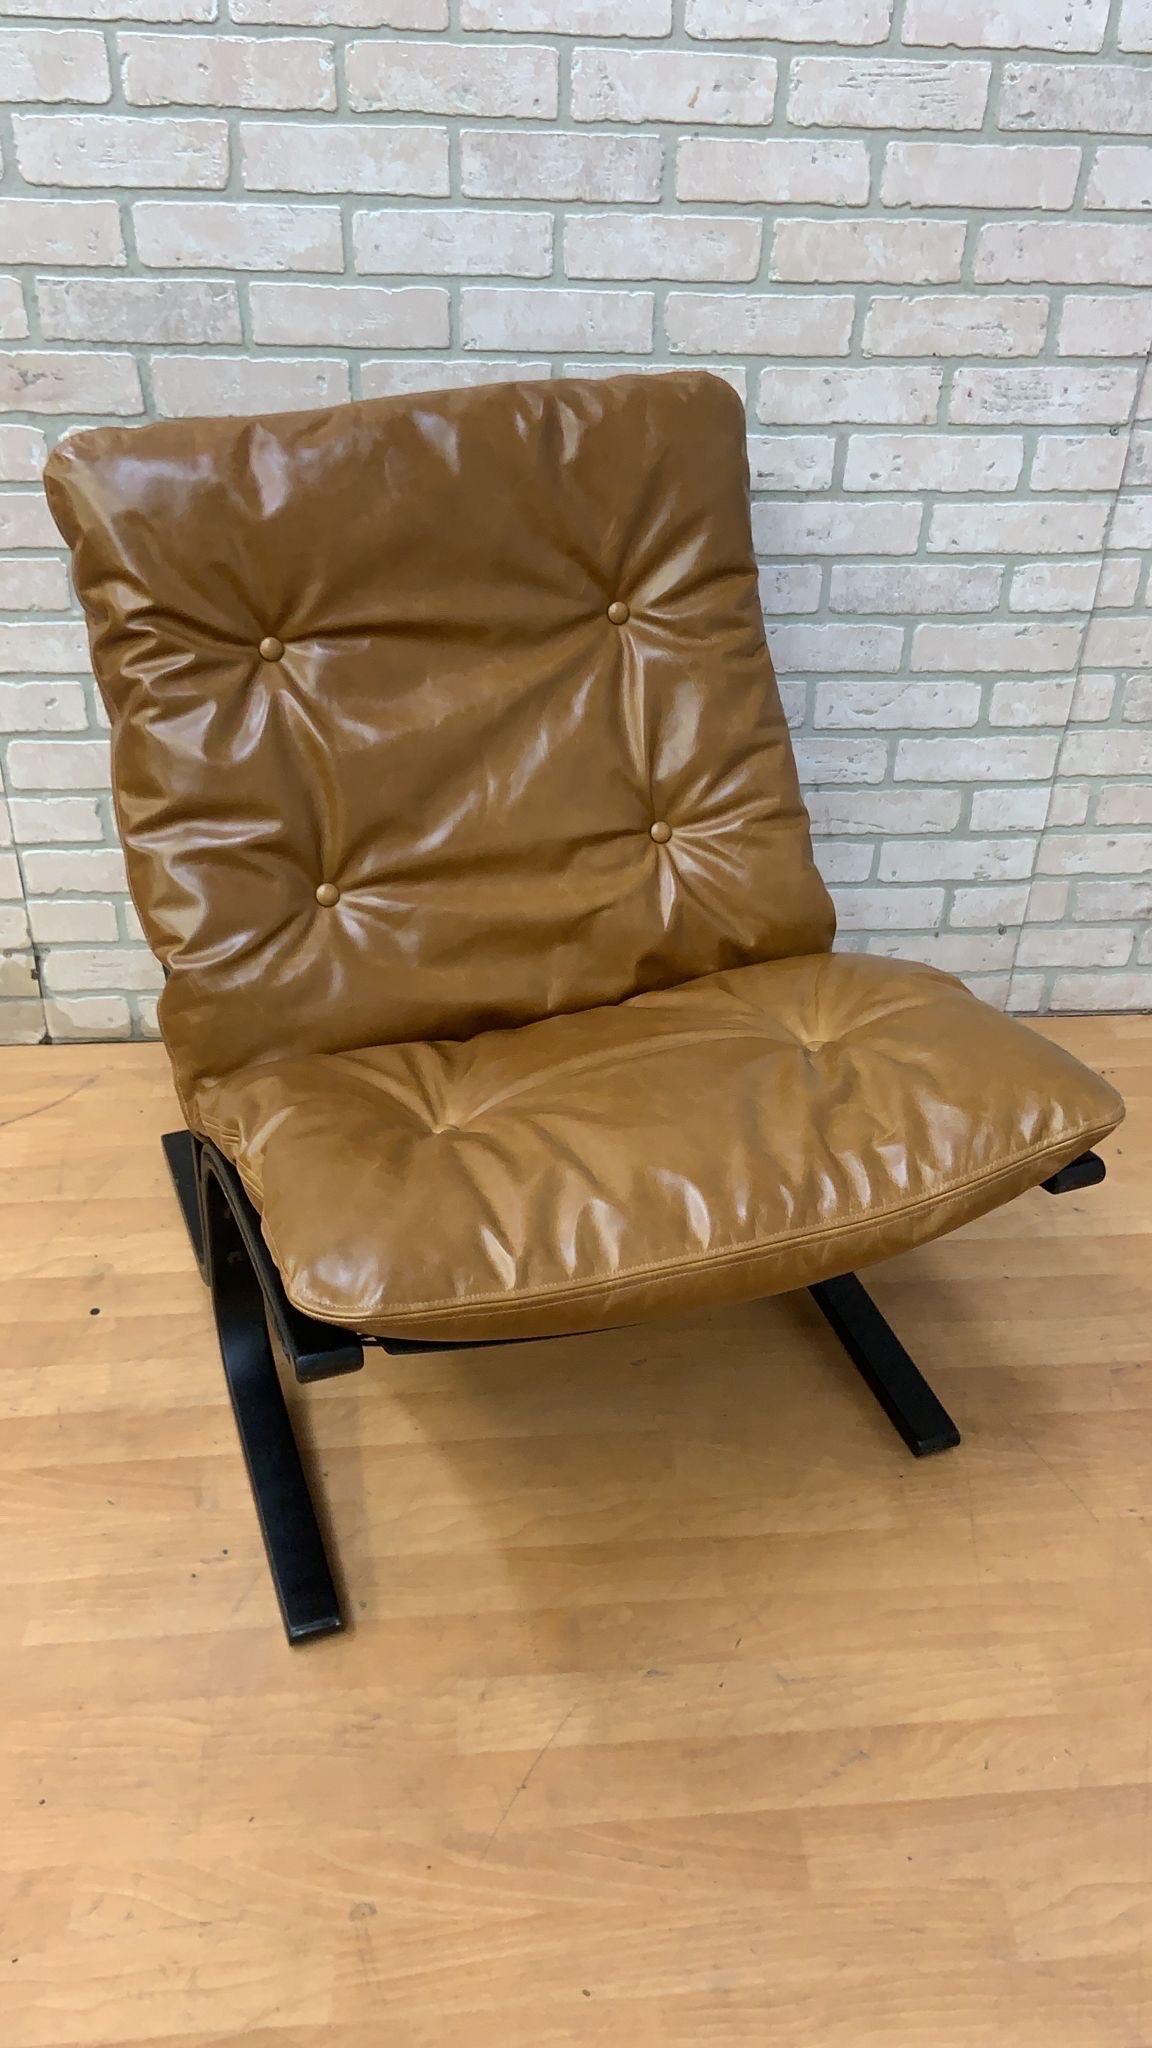 Mid-Century Modern Low Back Siesta Lounge by Westnofa Newly Upholstered in Distressed Cognac Italian Leather

Ingmar Relling for Westnofa low back Siesta chair. This authentic Mid-Century Modern sling chair features Newly Upholstered Full Grain